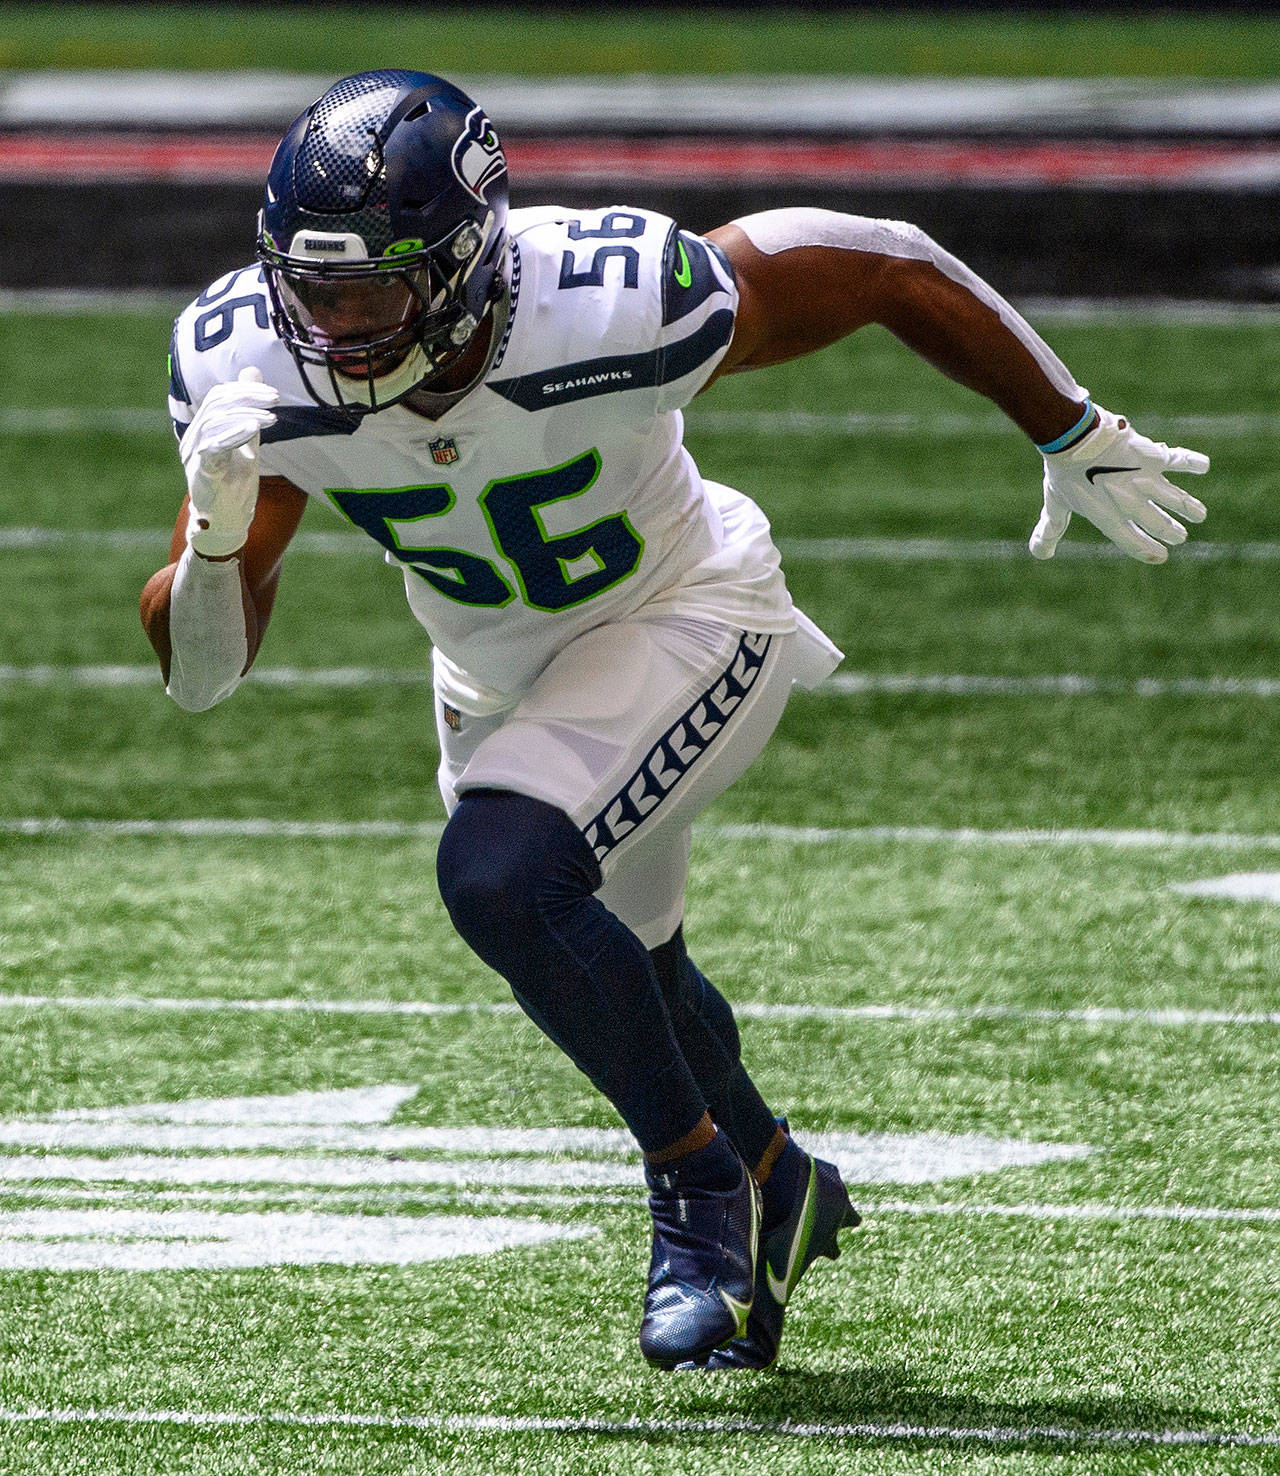 Seahawks linebacker Jordyn Brooks in action during the first half of a game against the Falcons on Sept. 13, 2020, in Atlanta. (AP Photo/Danny Karnik)